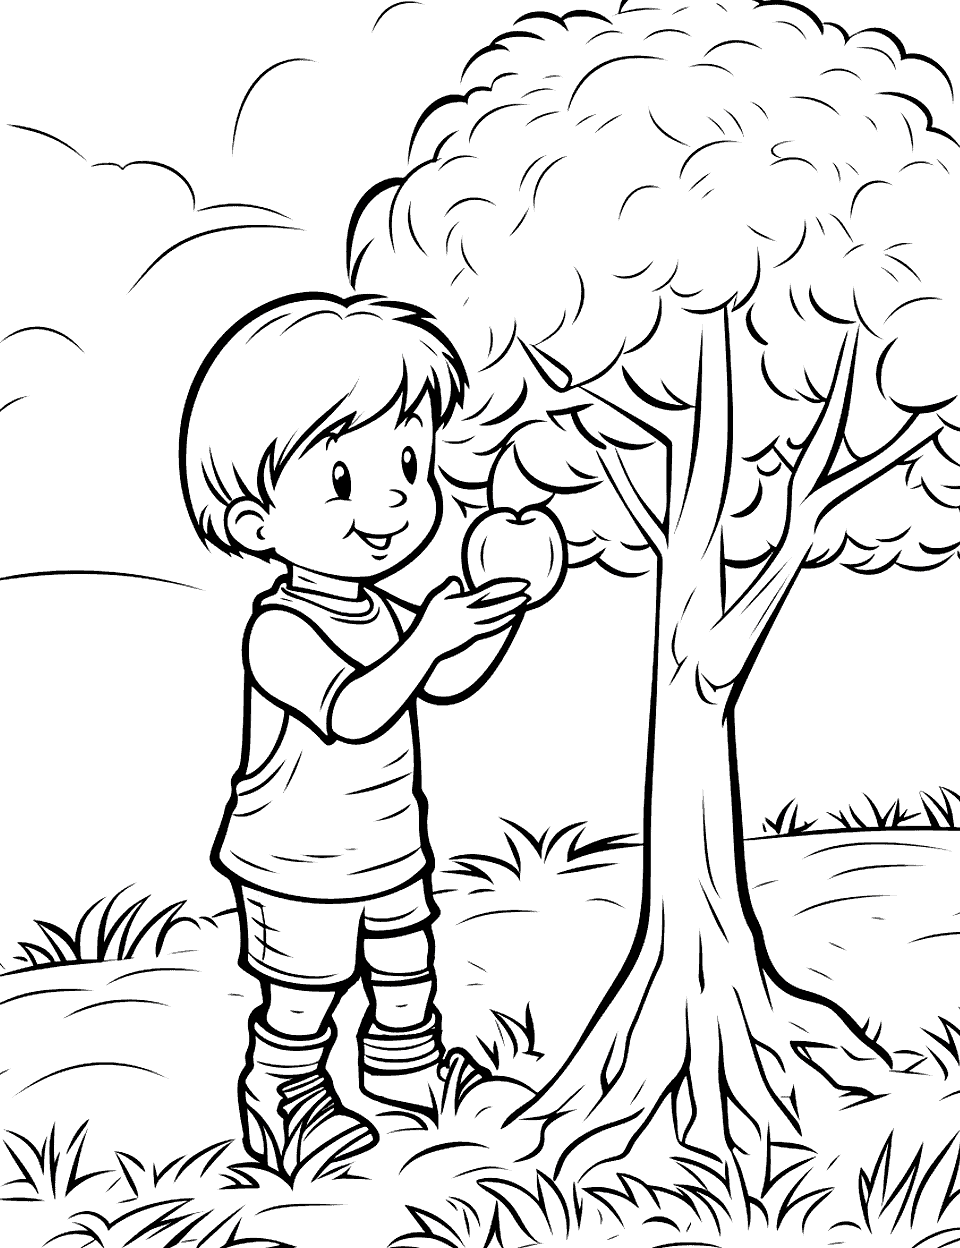 Apple Picking Farm Coloring Page - A child picking apples from an apple tree.